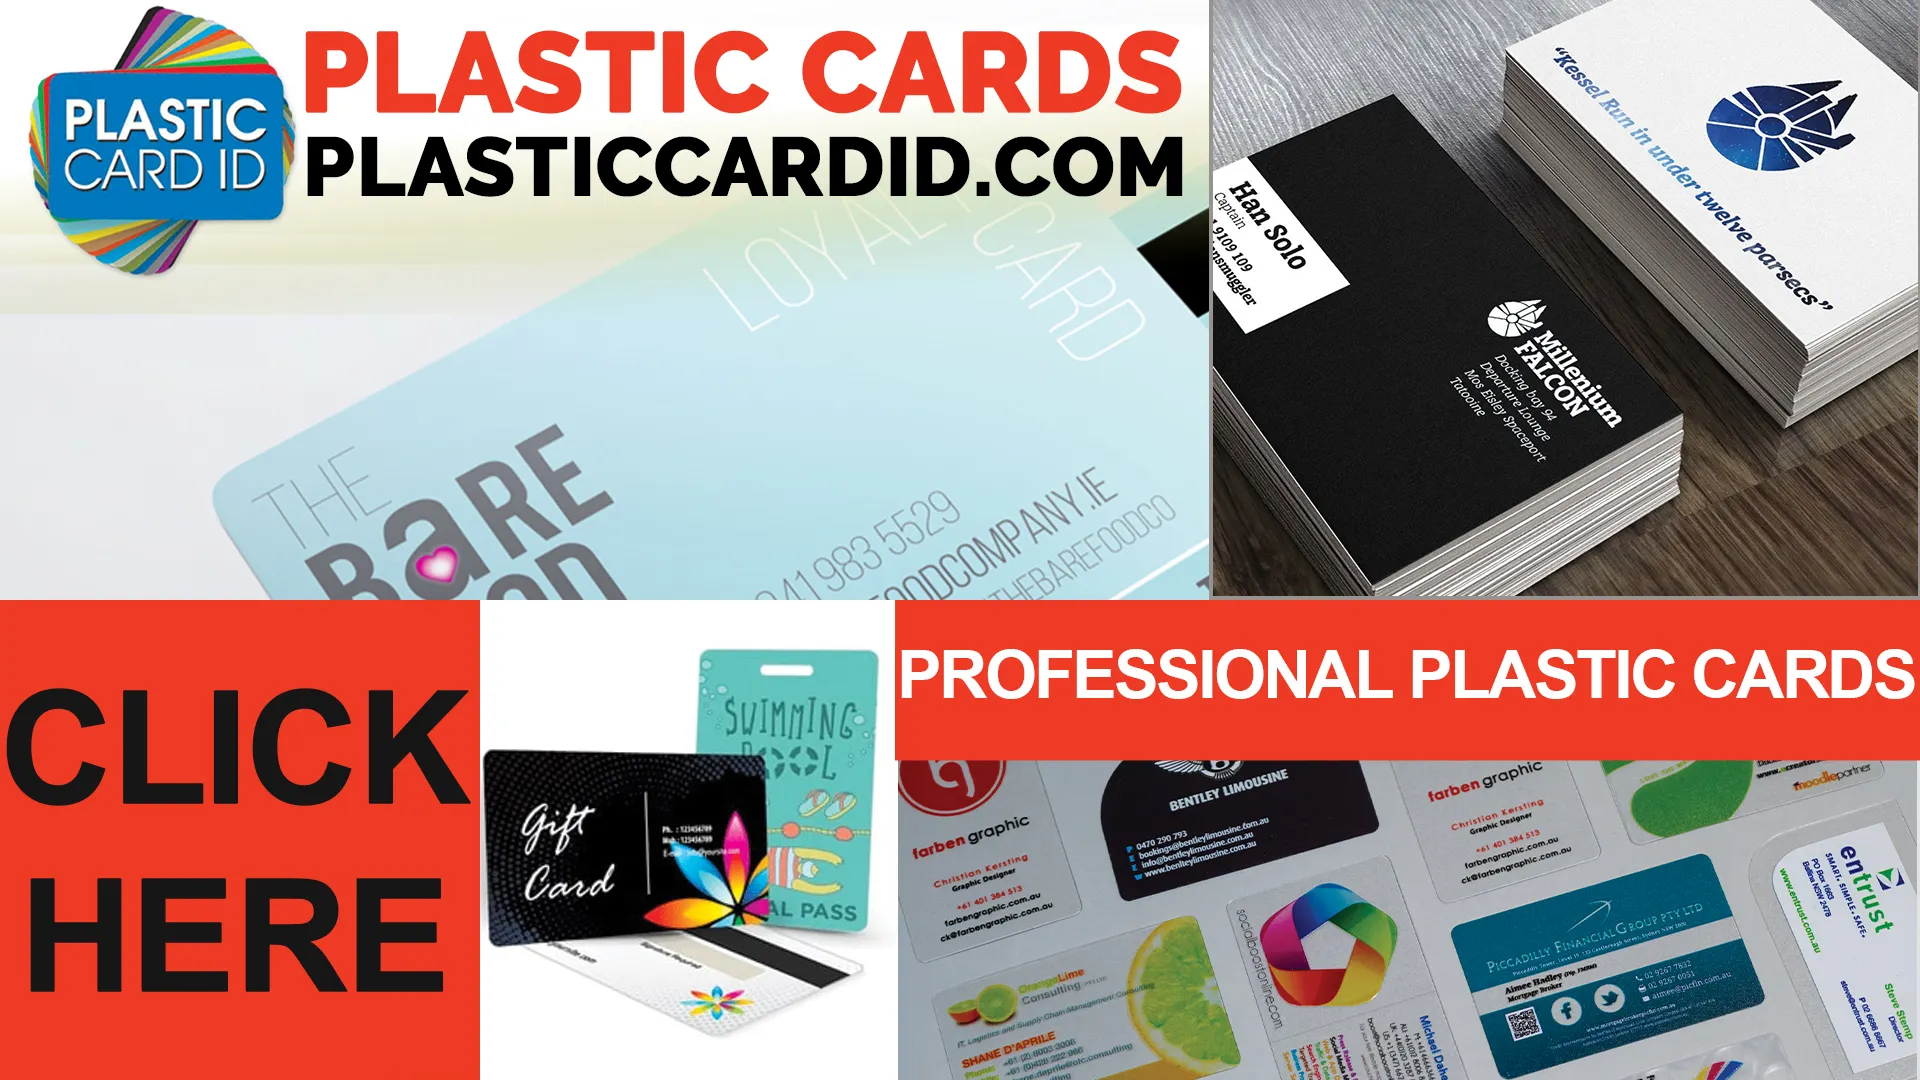 The Art of the Card: Creativity and Practicality Combined